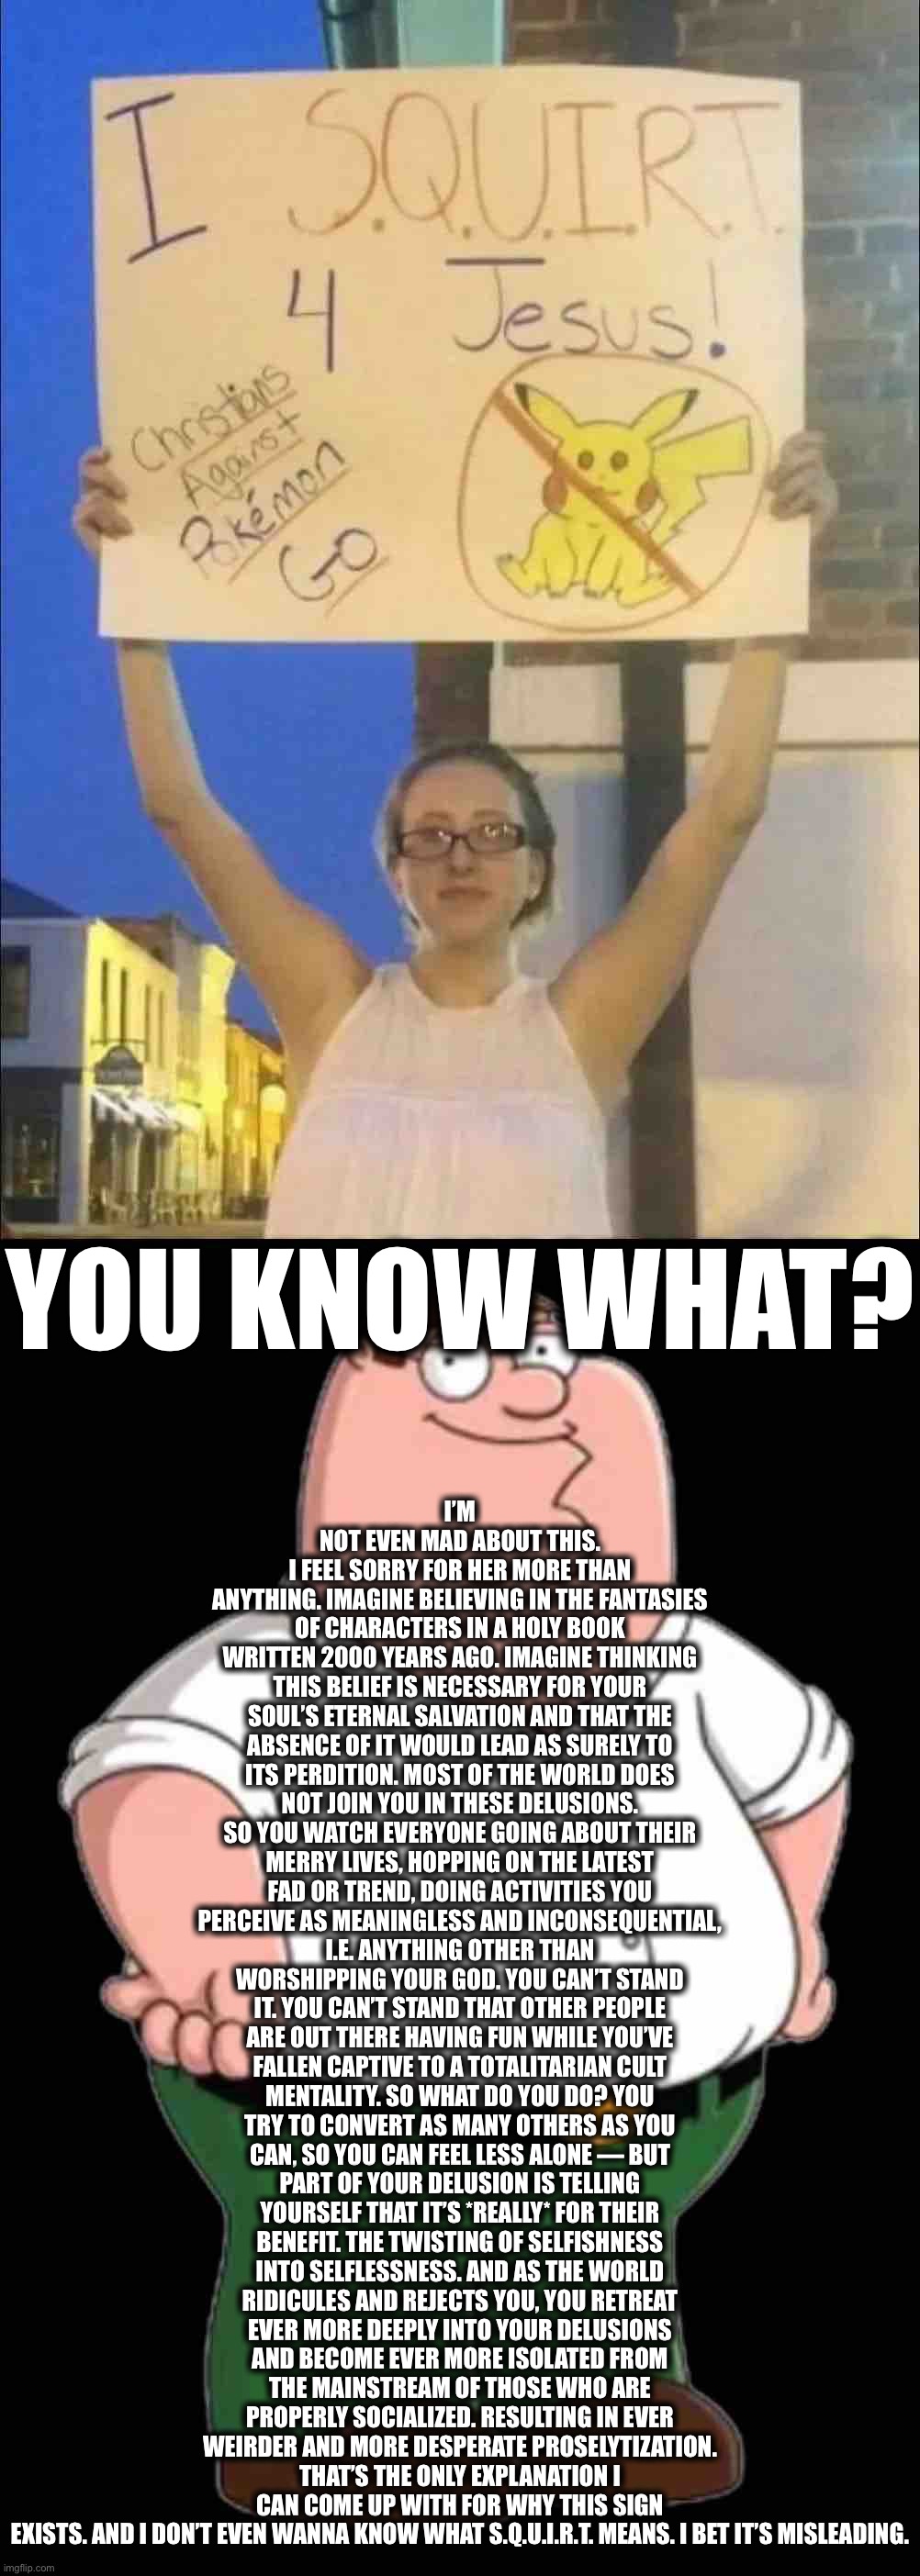 Peter Griffin wants to know what the hell is this shit. | I’M NOT EVEN MAD ABOUT THIS. I FEEL SORRY FOR HER MORE THAN ANYTHING. IMAGINE BELIEVING IN THE FANTASIES OF CHARACTERS IN A HOLY BOOK WRITTEN 2000 YEARS AGO. IMAGINE THINKING THIS BELIEF IS NECESSARY FOR YOUR SOUL’S ETERNAL SALVATION AND THAT THE ABSENCE OF IT WOULD LEAD AS SURELY TO ITS PERDITION. MOST OF THE WORLD DOES NOT JOIN YOU IN THESE DELUSIONS. SO YOU WATCH EVERYONE GOING ABOUT THEIR MERRY LIVES, HOPPING ON THE LATEST FAD OR TREND, DOING ACTIVITIES YOU PERCEIVE AS MEANINGLESS AND INCONSEQUENTIAL, I.E. ANYTHING OTHER THAN WORSHIPPING YOUR GOD. YOU CAN’T STAND IT. YOU CAN’T STAND THAT OTHER PEOPLE ARE OUT THERE HAVING FUN WHILE YOU’VE FALLEN CAPTIVE TO A TOTALITARIAN CULT MENTALITY. SO WHAT DO YOU DO? YOU TRY TO CONVERT AS MANY OTHERS AS YOU CAN, SO YOU CAN FEEL LESS ALONE — BUT PART OF YOUR DELUSION IS TELLING YOURSELF THAT IT’S *REALLY* FOR THEIR BENEFIT. THE TWISTING OF SELFISHNESS INTO SELFLESSNESS. AND AS THE WORLD RIDICULES AND REJECTS YOU, YOU RETREAT EVER MORE DEEPLY INTO YOUR DELUSIONS AND BECOME EVER MORE ISOLATED FROM THE MAINSTREAM OF THOSE WHO ARE PROPERLY SOCIALIZED. RESULTING IN EVER WEIRDER AND MORE DESPERATE PROSELYTIZATION. THAT’S THE ONLY EXPLANATION I CAN COME UP WITH FOR WHY THIS SIGN EXISTS. AND I DON’T EVEN WANNA KNOW WHAT S.Q.U.I.R.T. MEANS. I BET IT’S MISLEADING. YOU KNOW WHAT? | image tagged in i squirt 4 jesus,peter griffin transparent,christian,christians,weirdo,wot | made w/ Imgflip meme maker